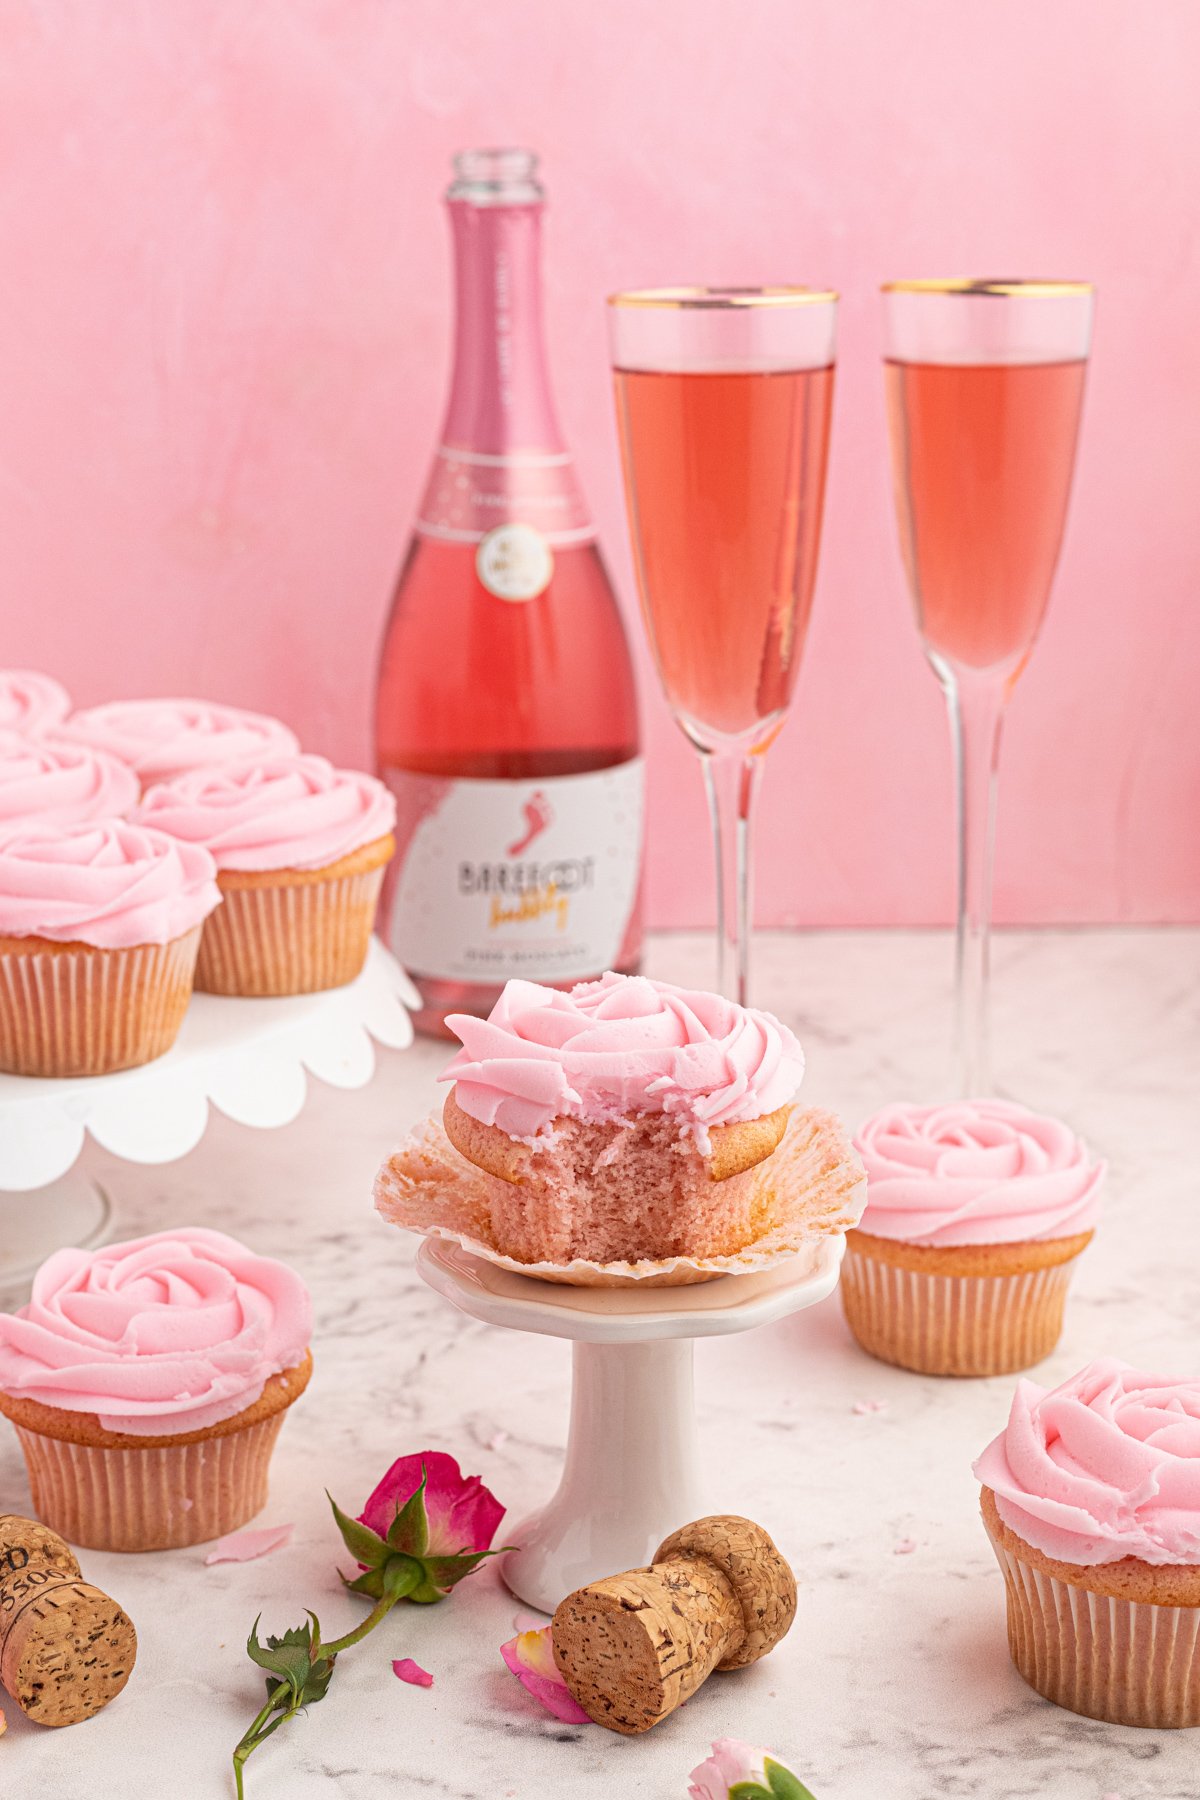 side view of a bitten moscato cupcake on a cupcake stand in front of 2 glasses of pink moscato.